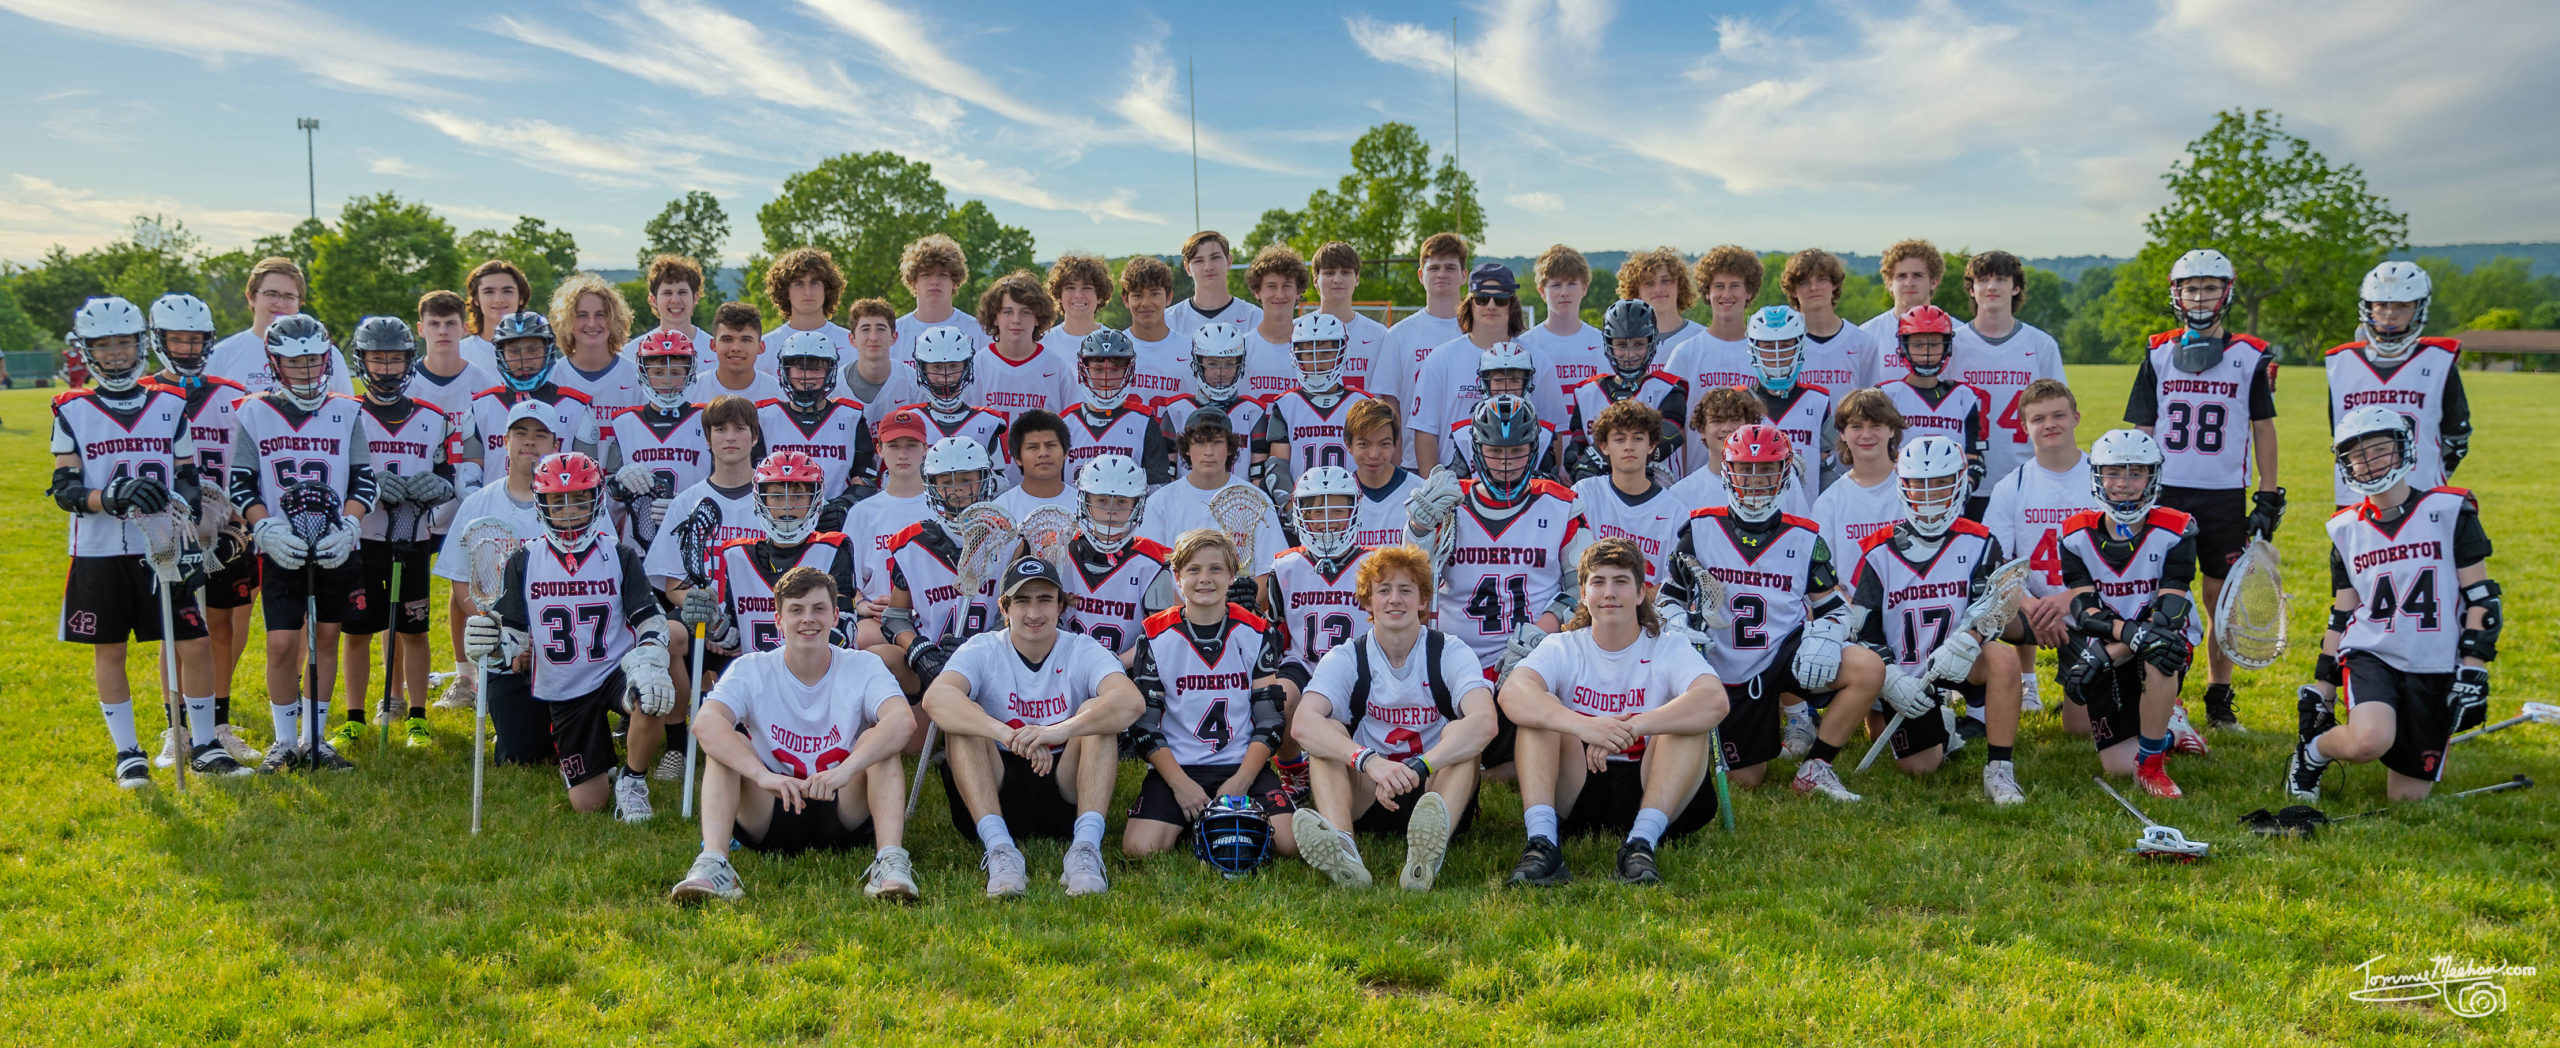 2021 Bs pose with the SAHS players at a game dedicated to Coach Mark Cornes shortly after his passing.